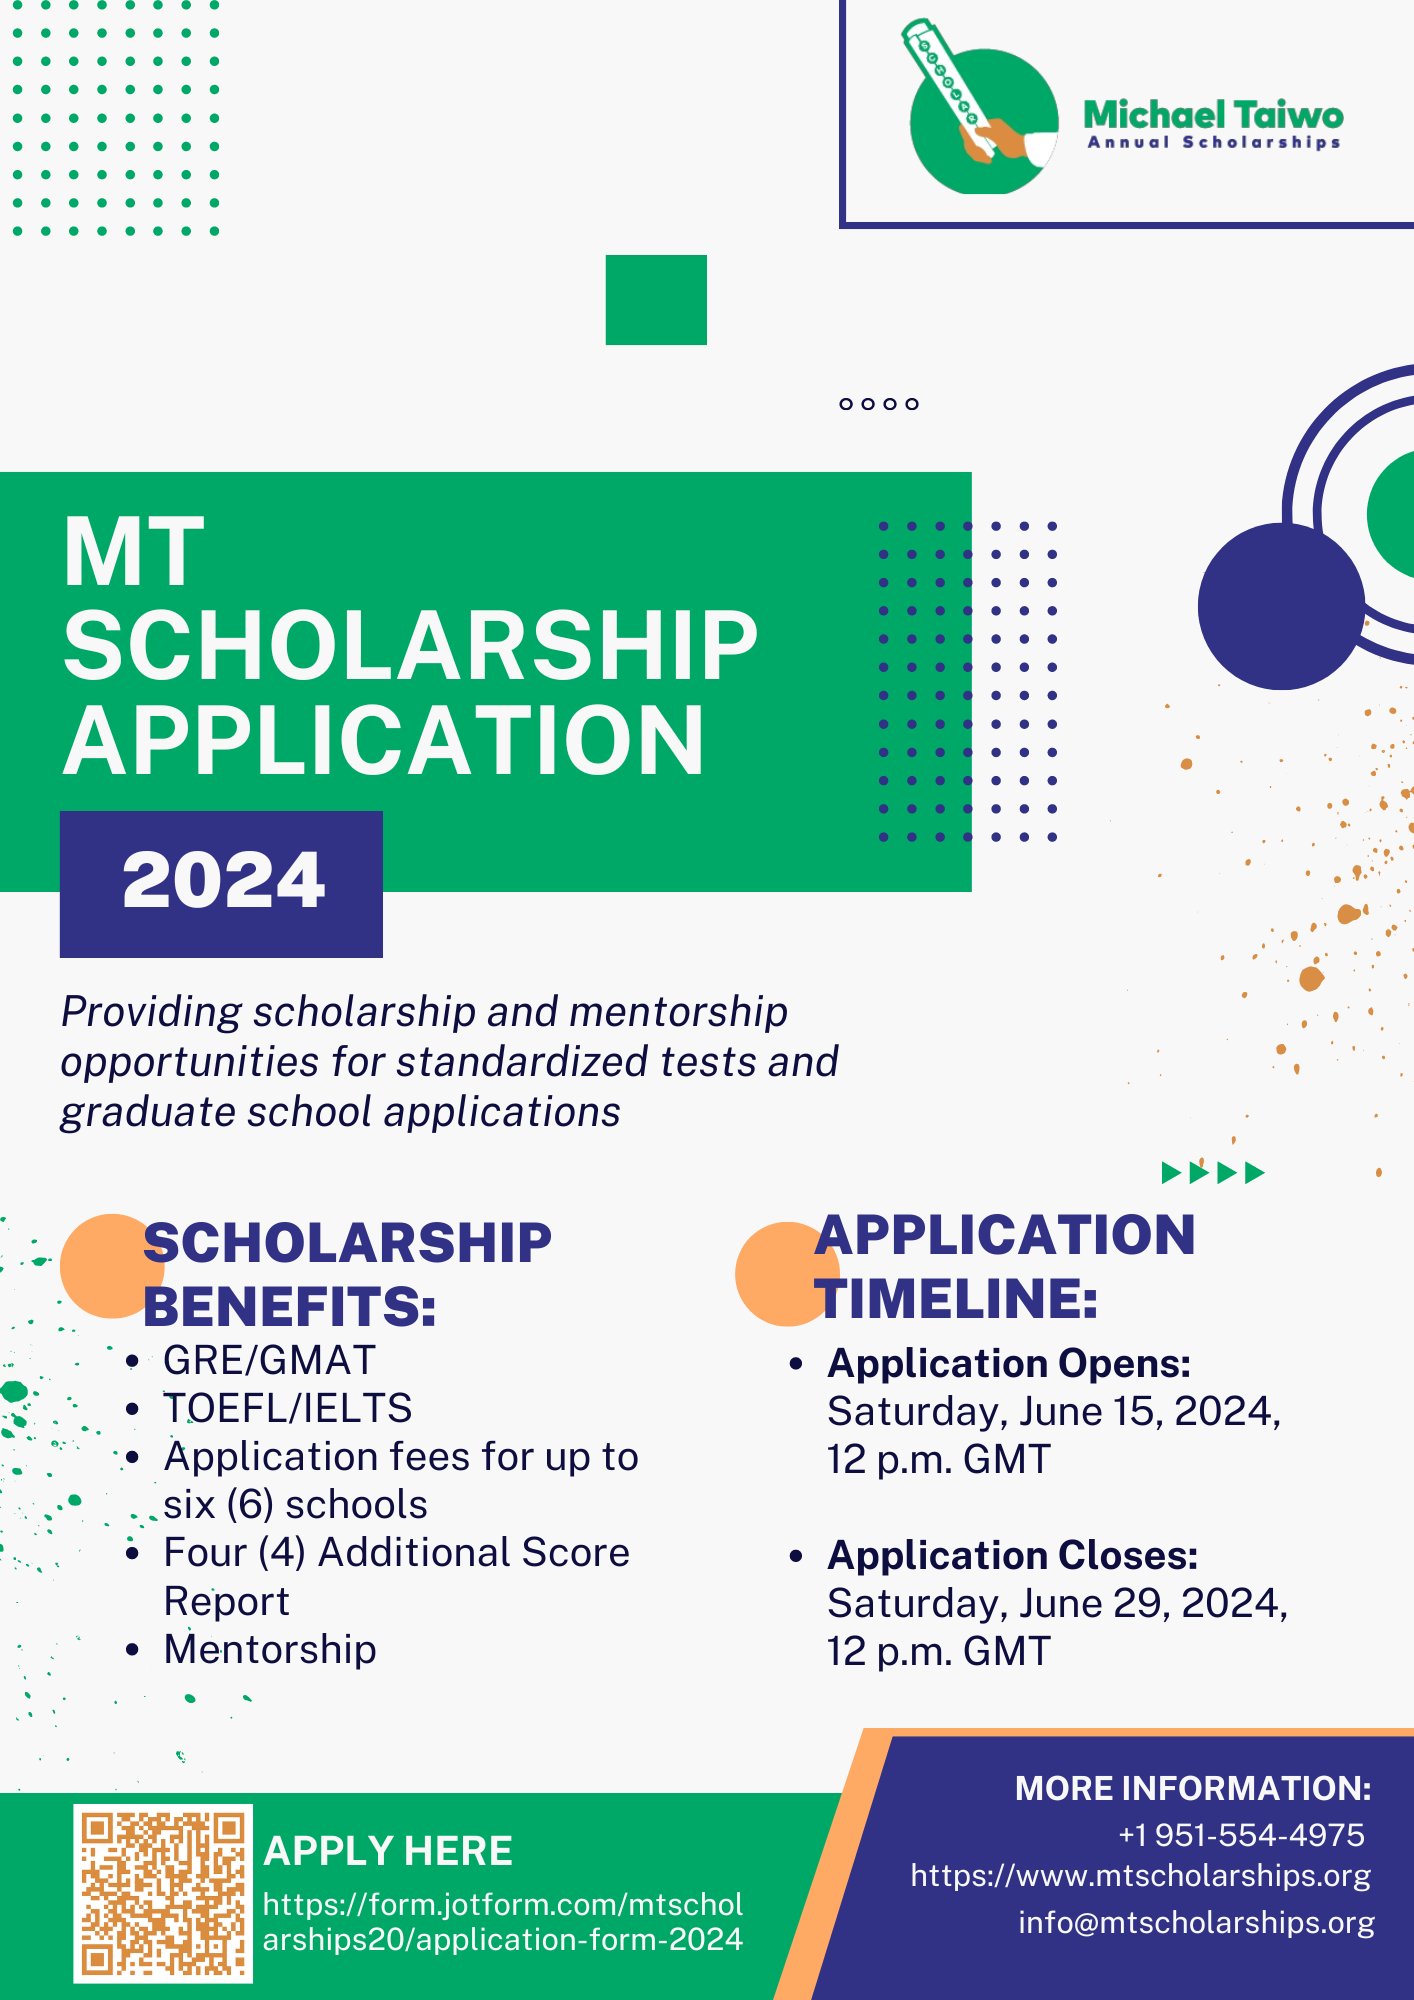 Call for Applications: MT Scholarship Programme 2024